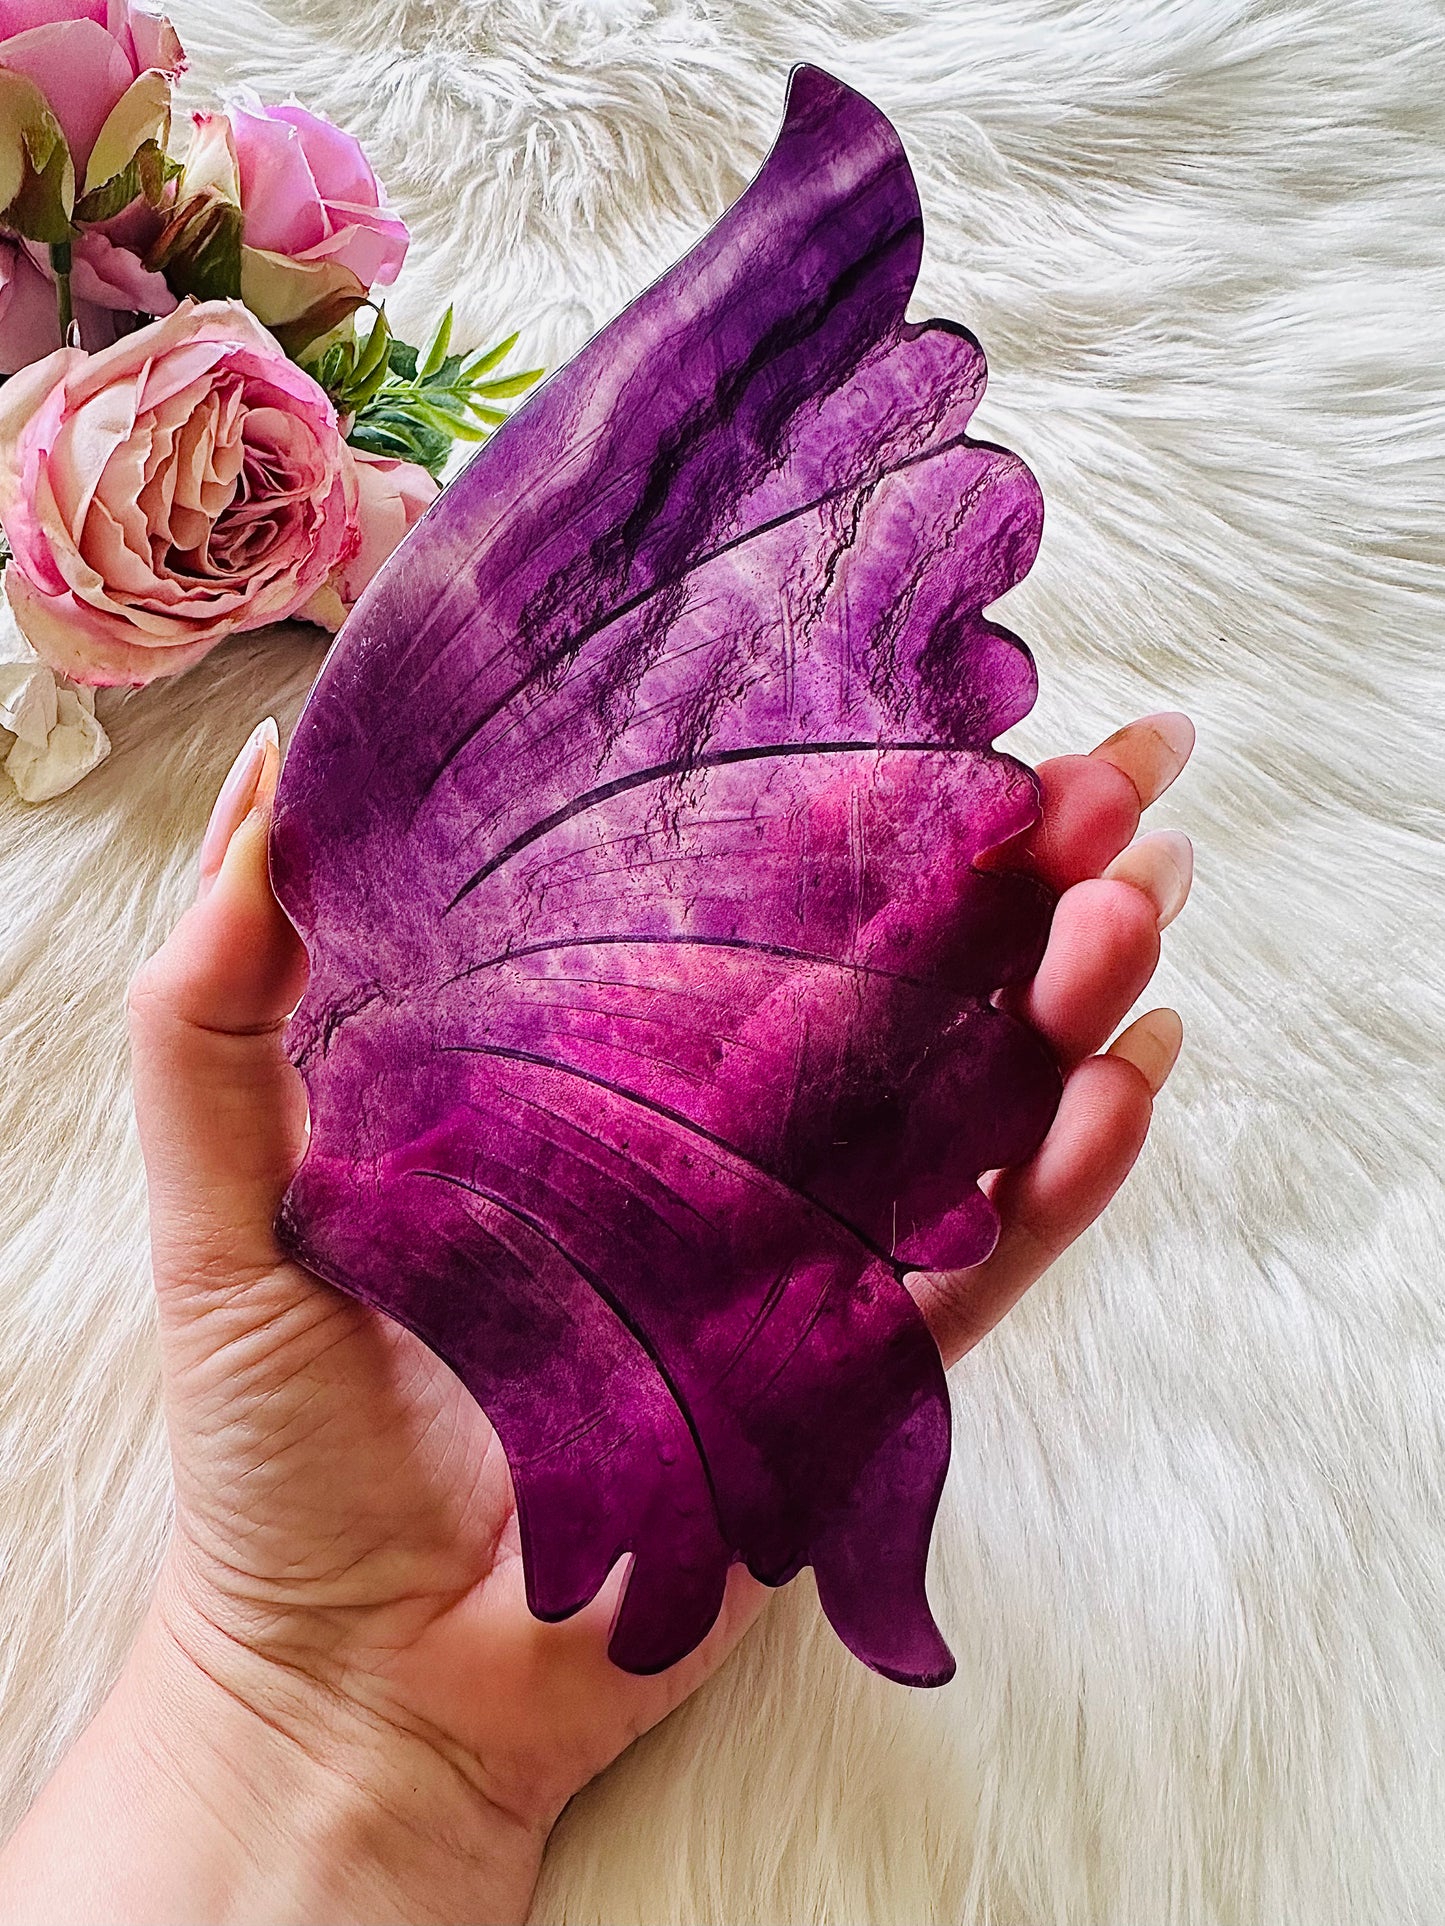 Sometimes, there are no words for the beauty I see. I cannot describe the intense energy & grace of this set. The most beautiful large 30cm (inc stand) purple fluorite butterfly wings on gold stand absolutely breathtaking….